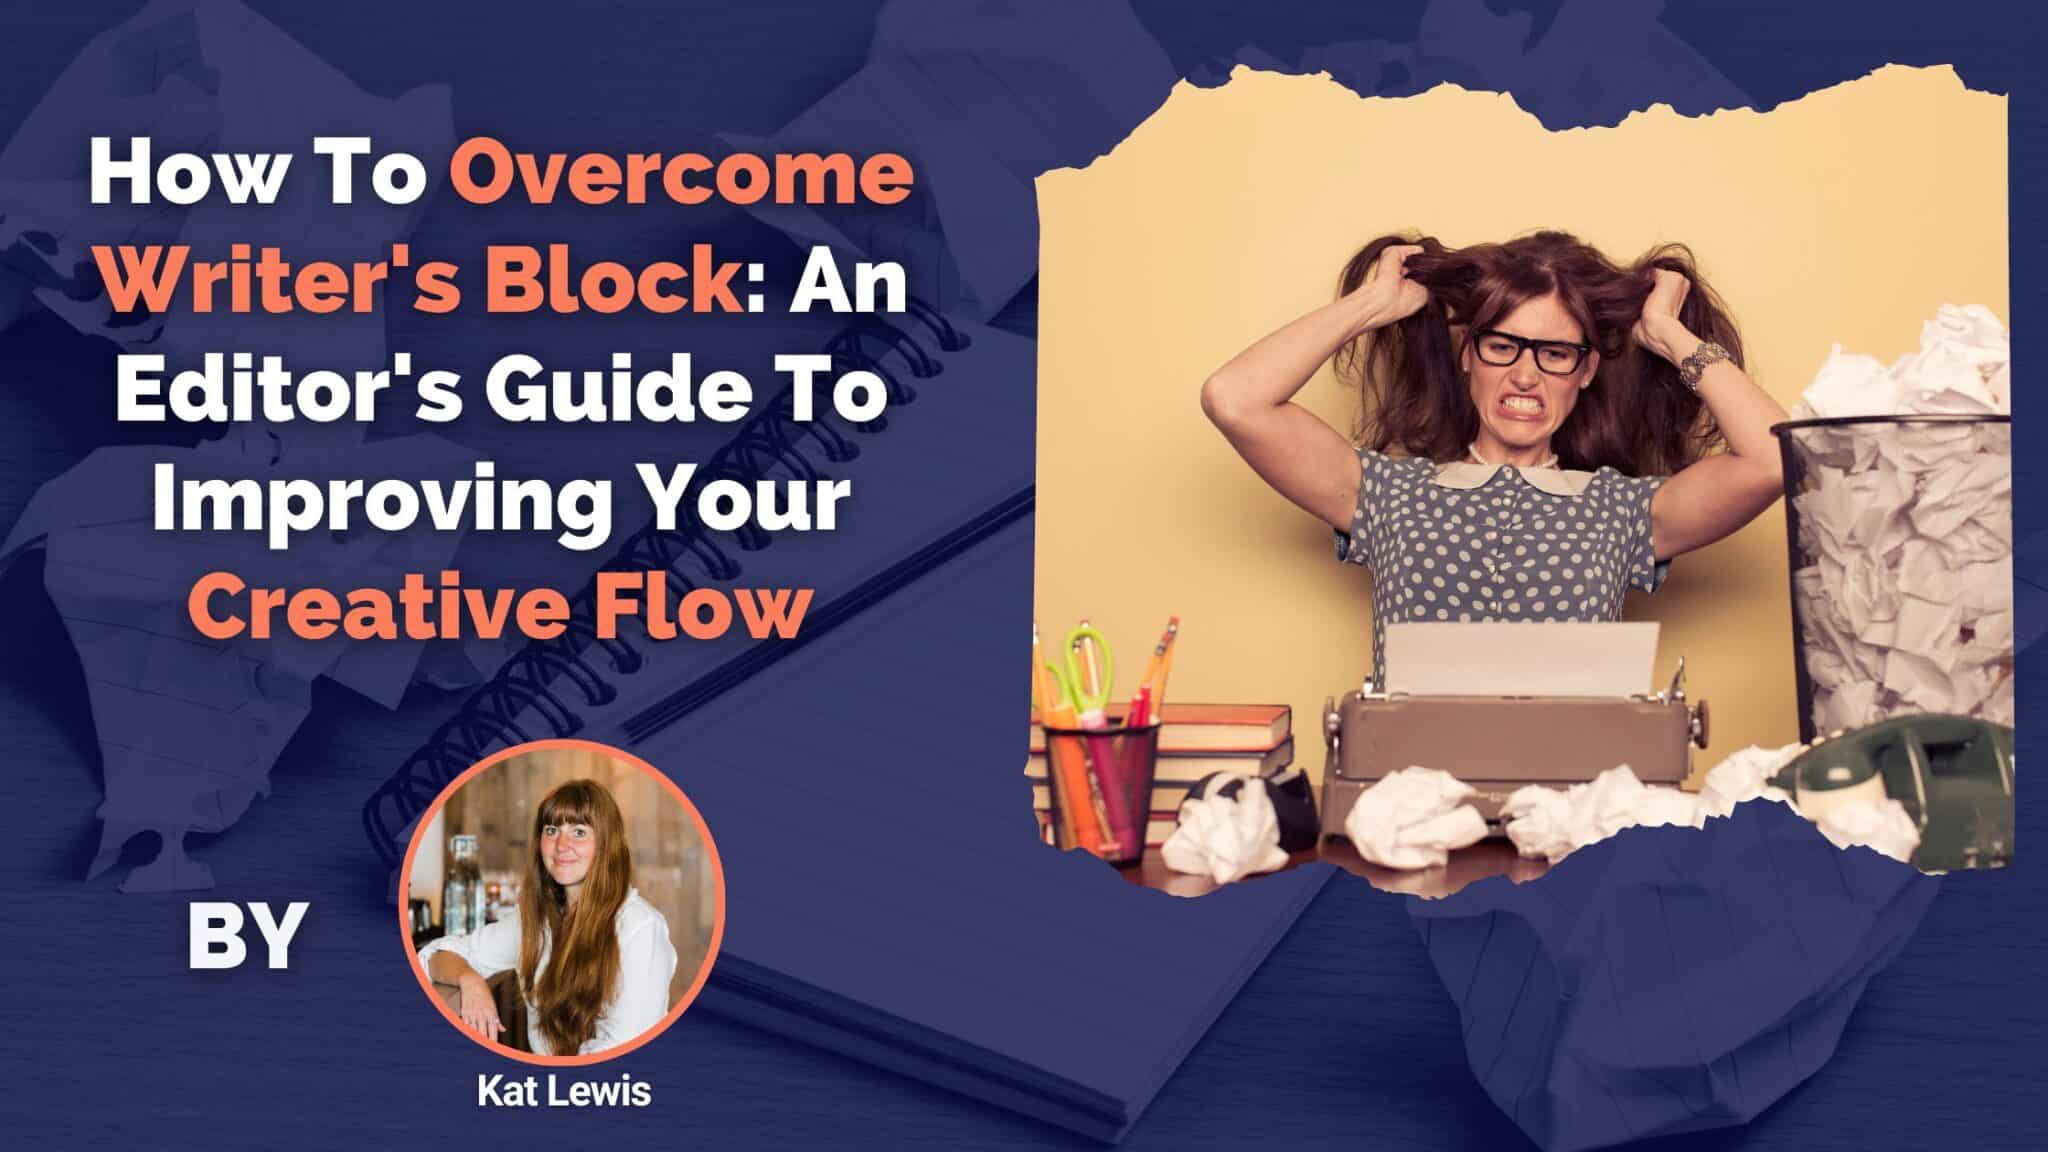 How To Overcome Writer’s Block: An Editor’s Guide To Improving Your Creative Flow